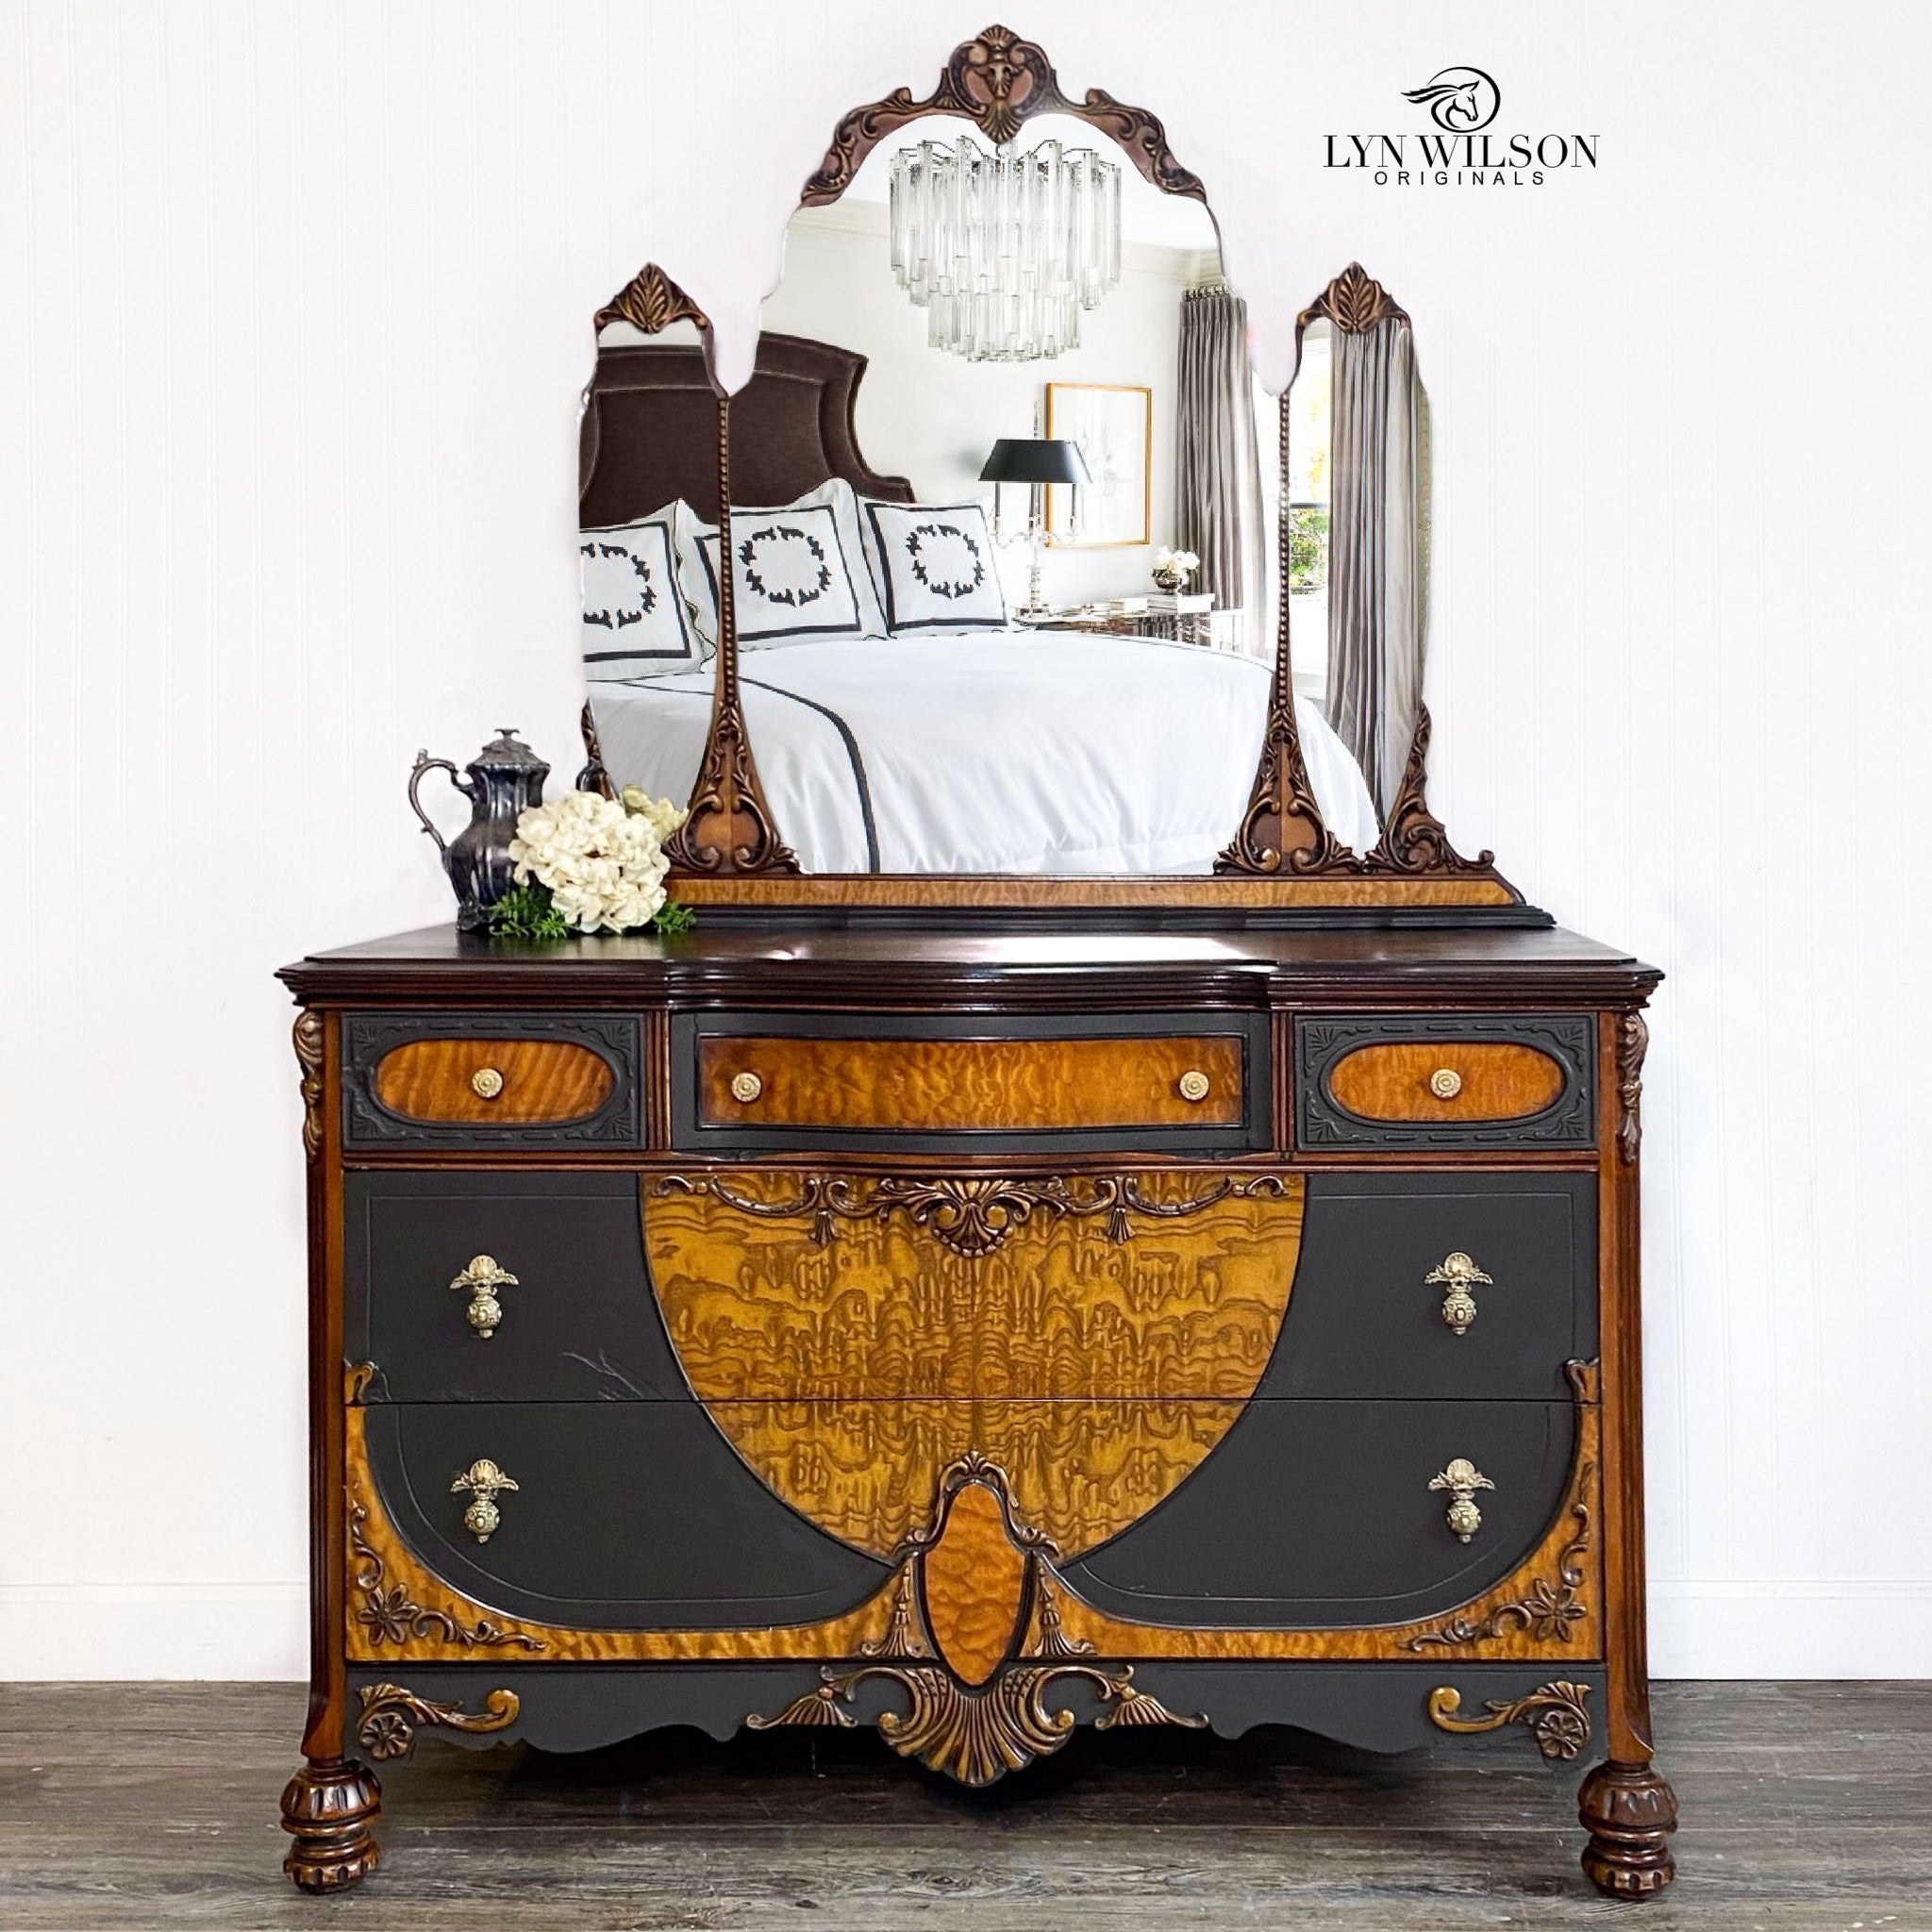 A vintage dresser with a tri-fold mirror refurbished by Lyn Wilson Originals has natural golden burlwood with Dixie Belle's Coffee Bean chalk mineral paint and bronze ornate accents.